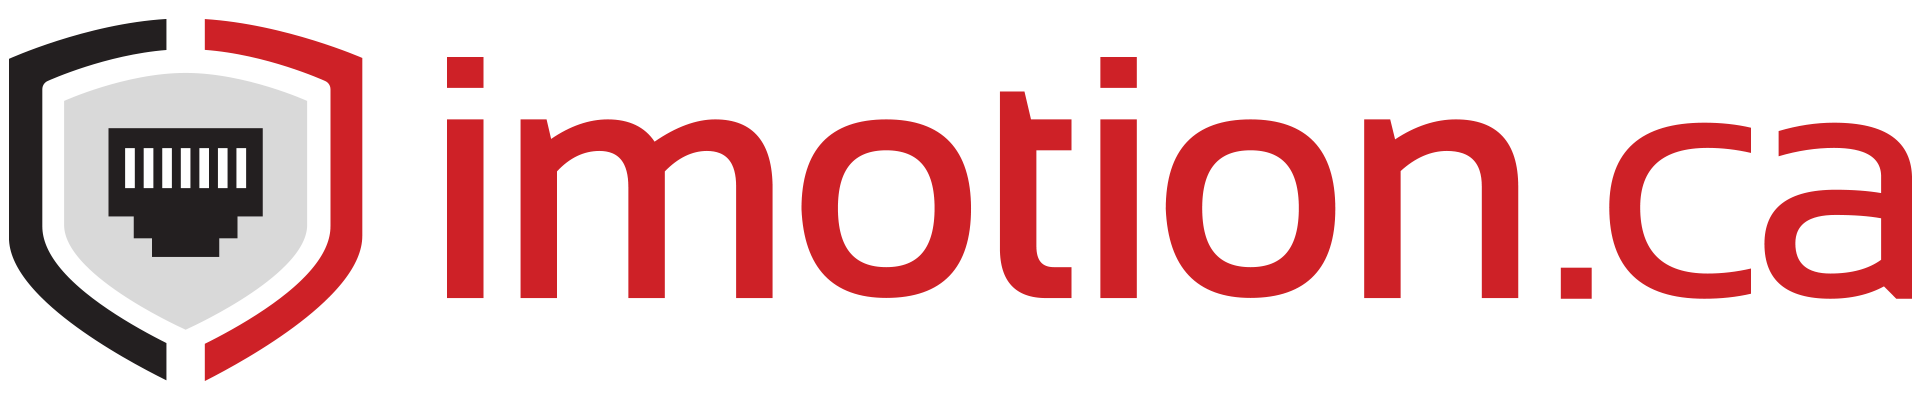 logo_imotion_rougefonce (1).png